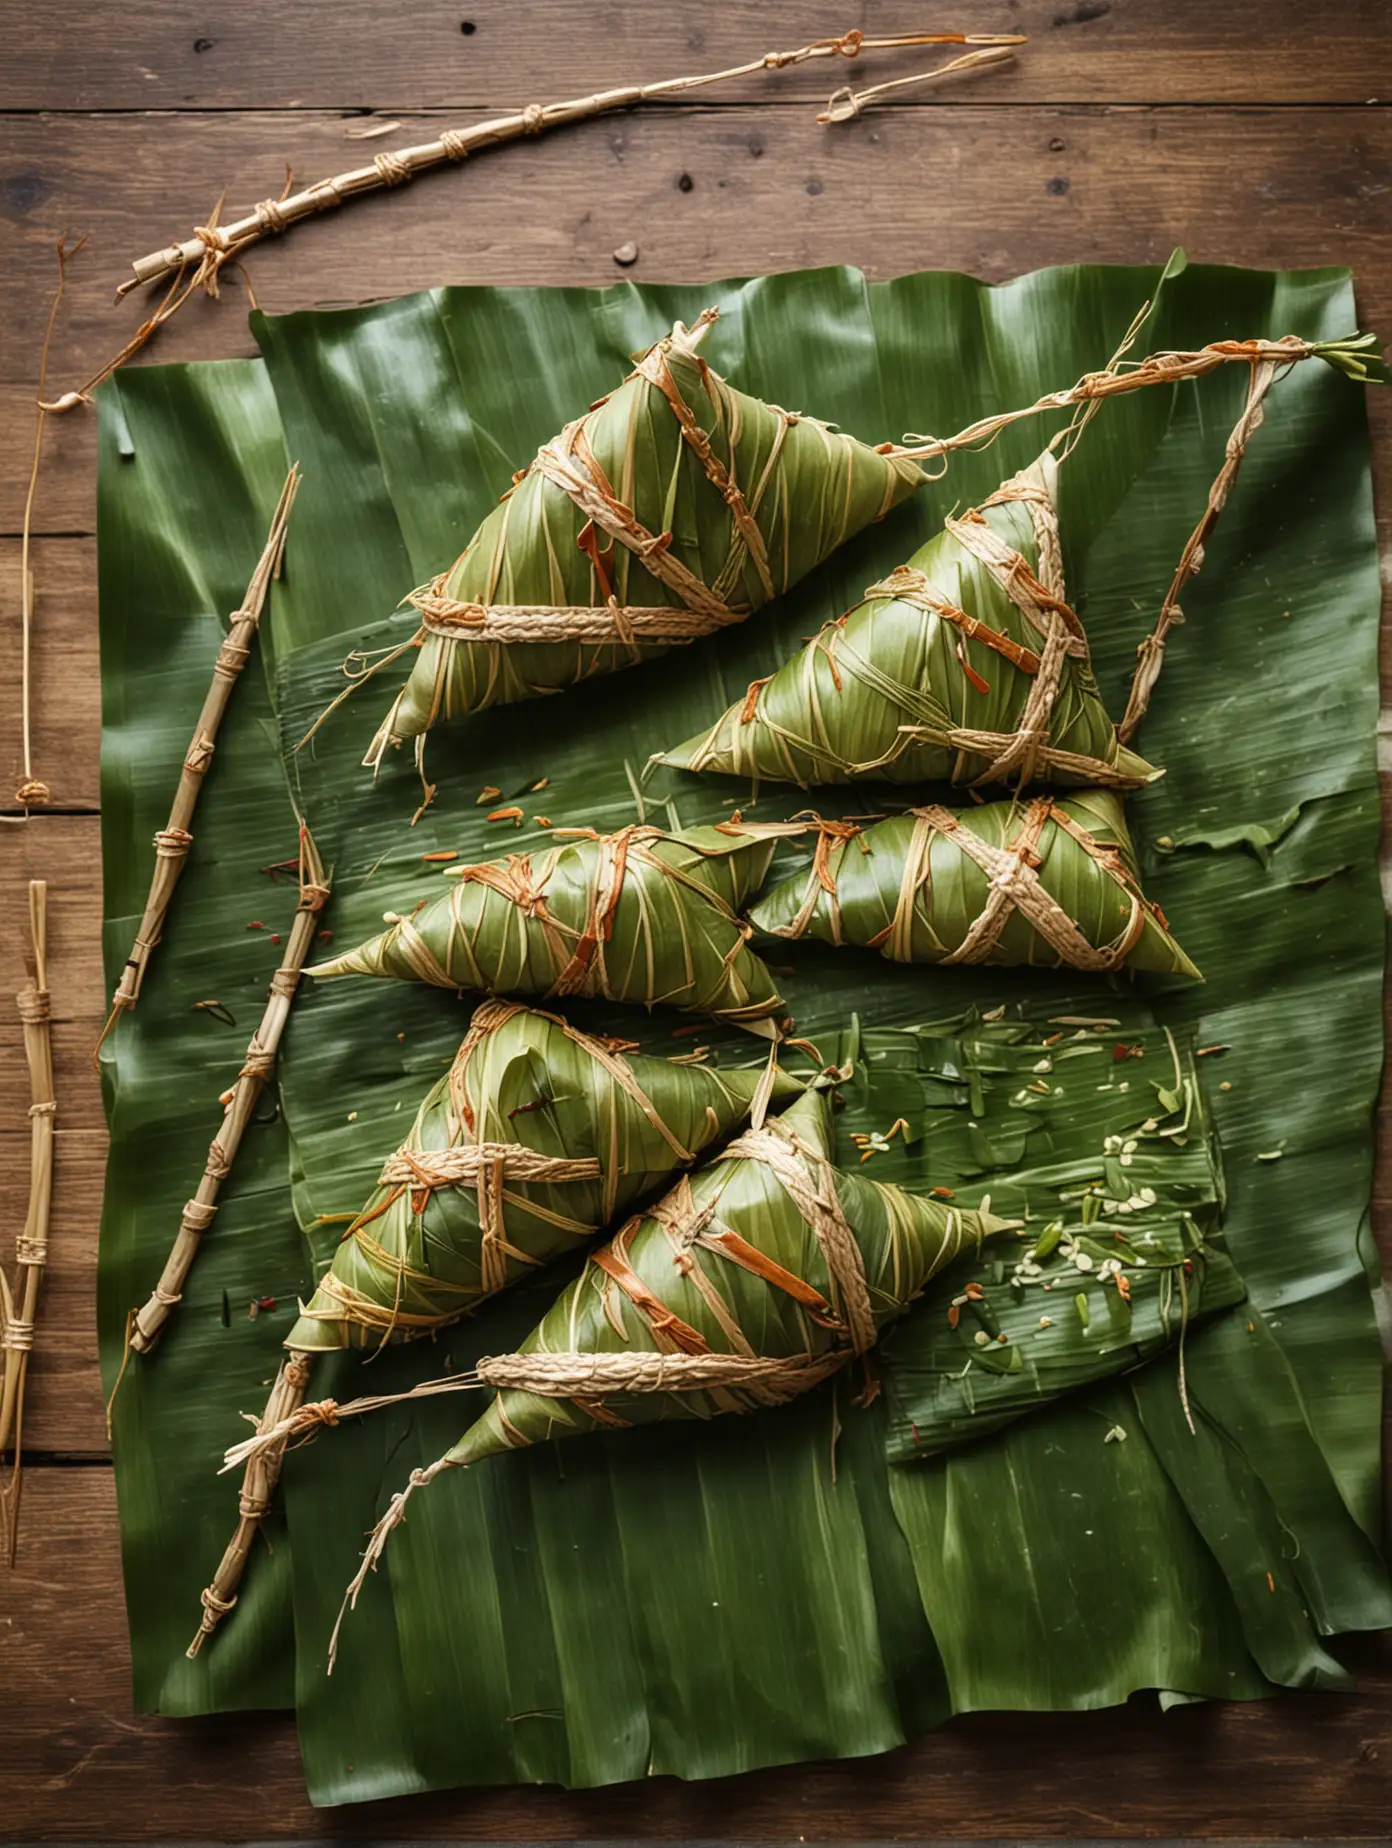 Chinese Dragon Boat Festival,zongzi ,Wrap the rice in bamboo leaves to form a triangle and tie it with a rope